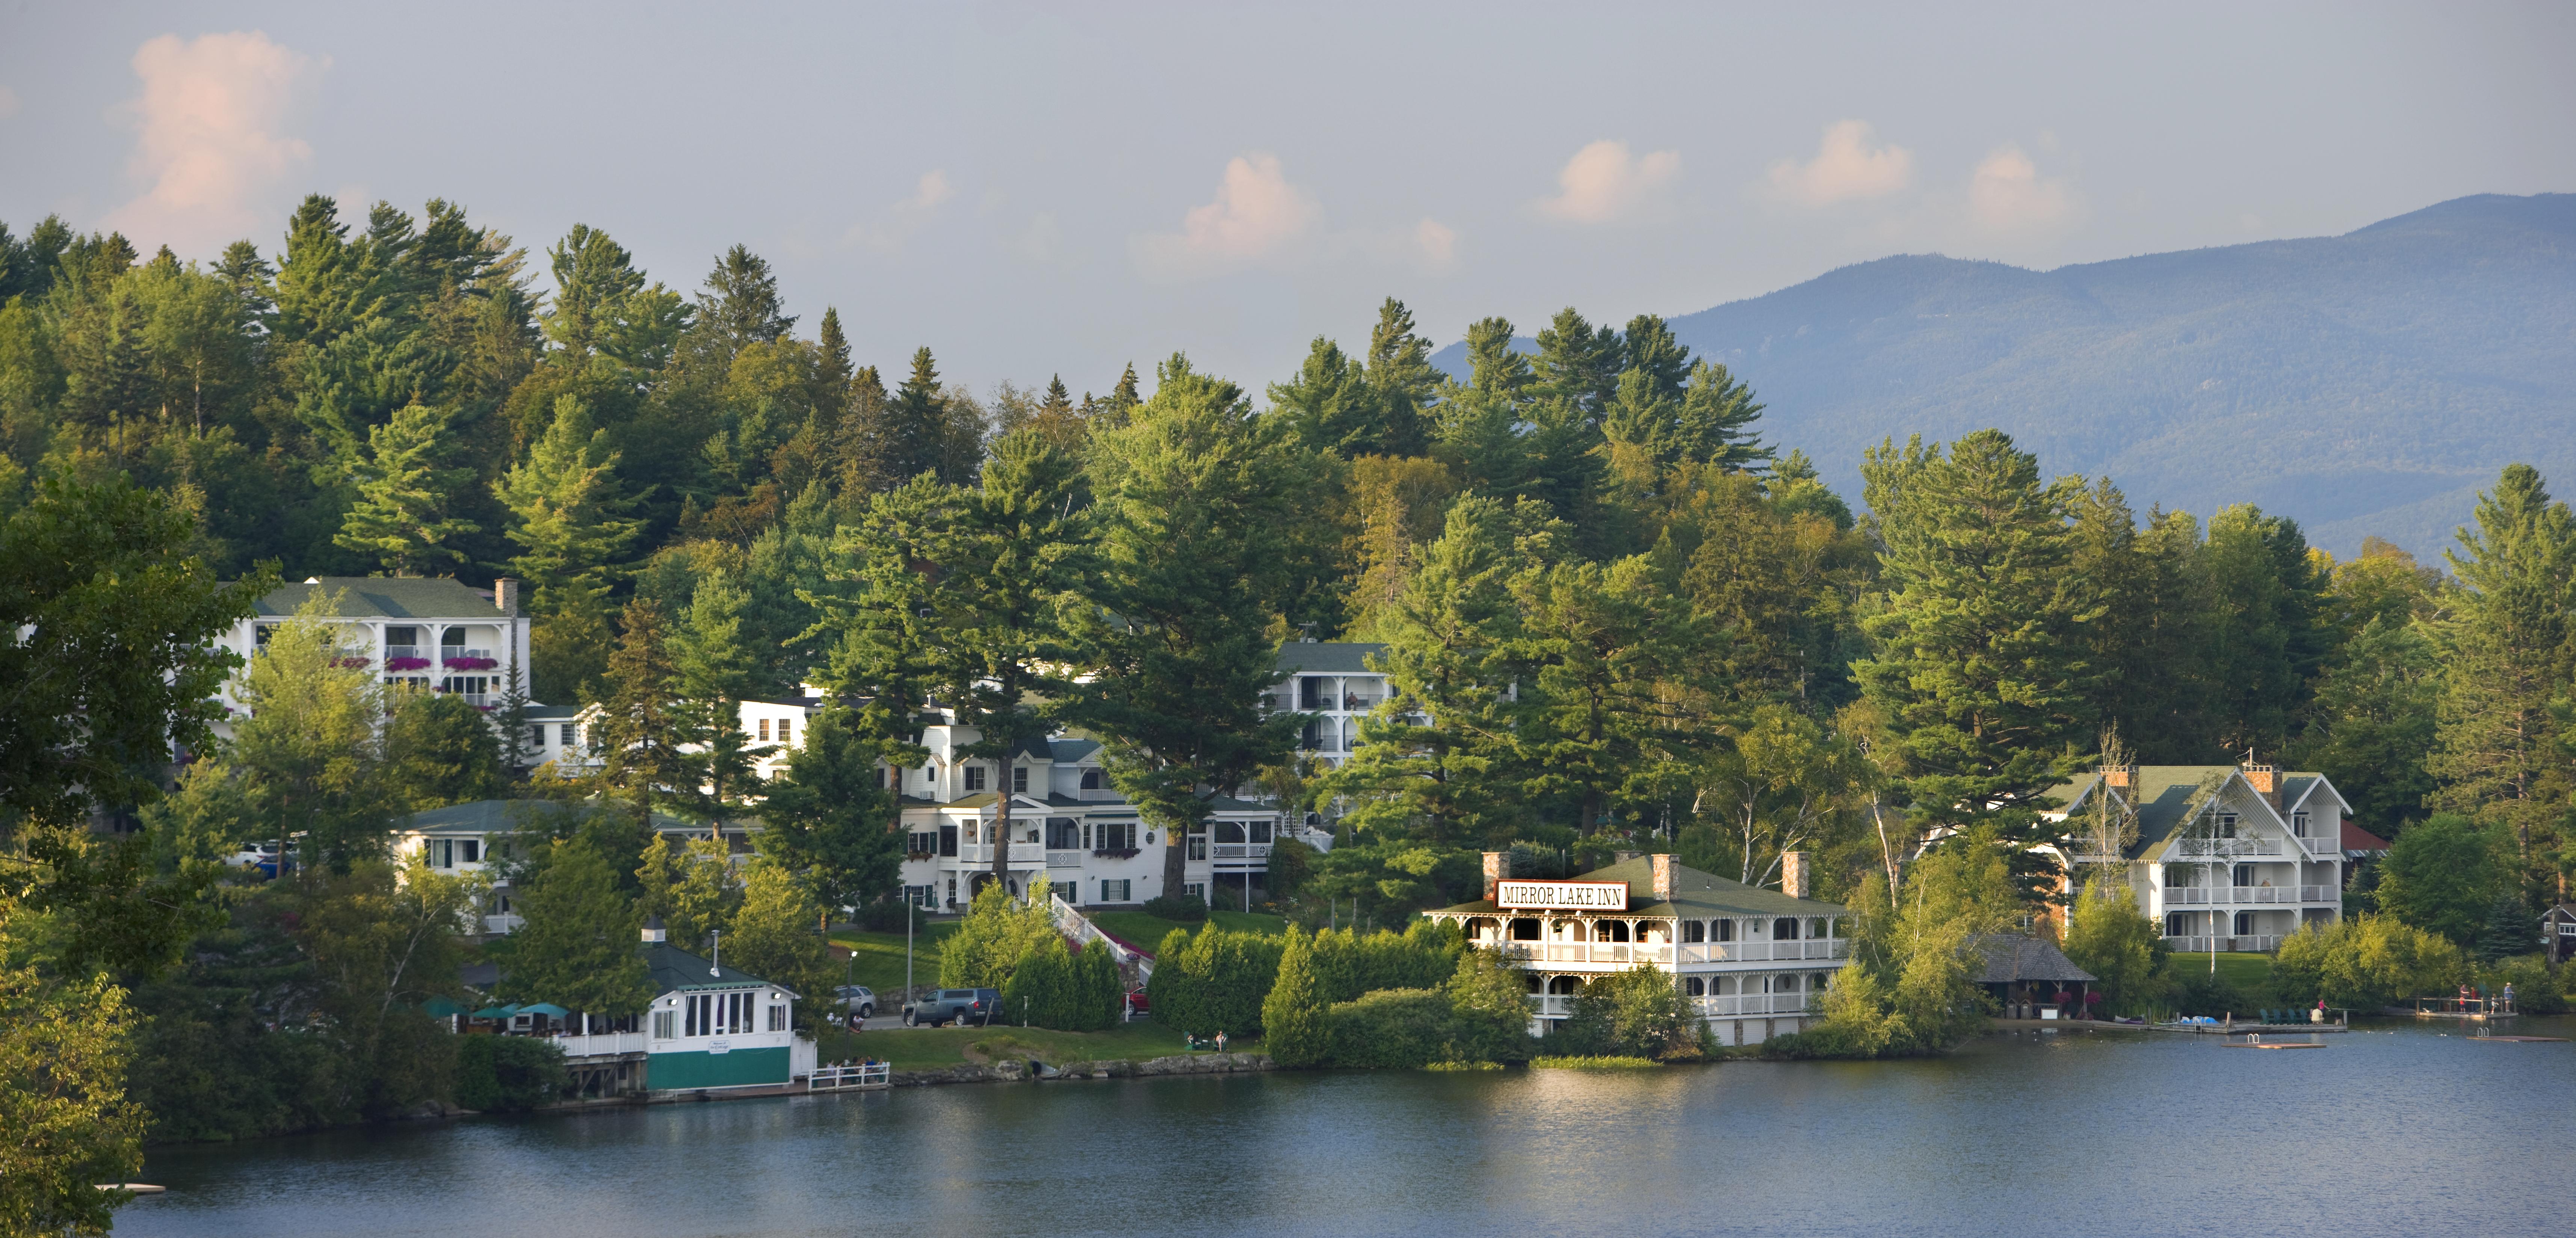 The Mirror Lake Inn takes second place in Reader's Choice voting for the USA Today 10Best waterfront hotels.